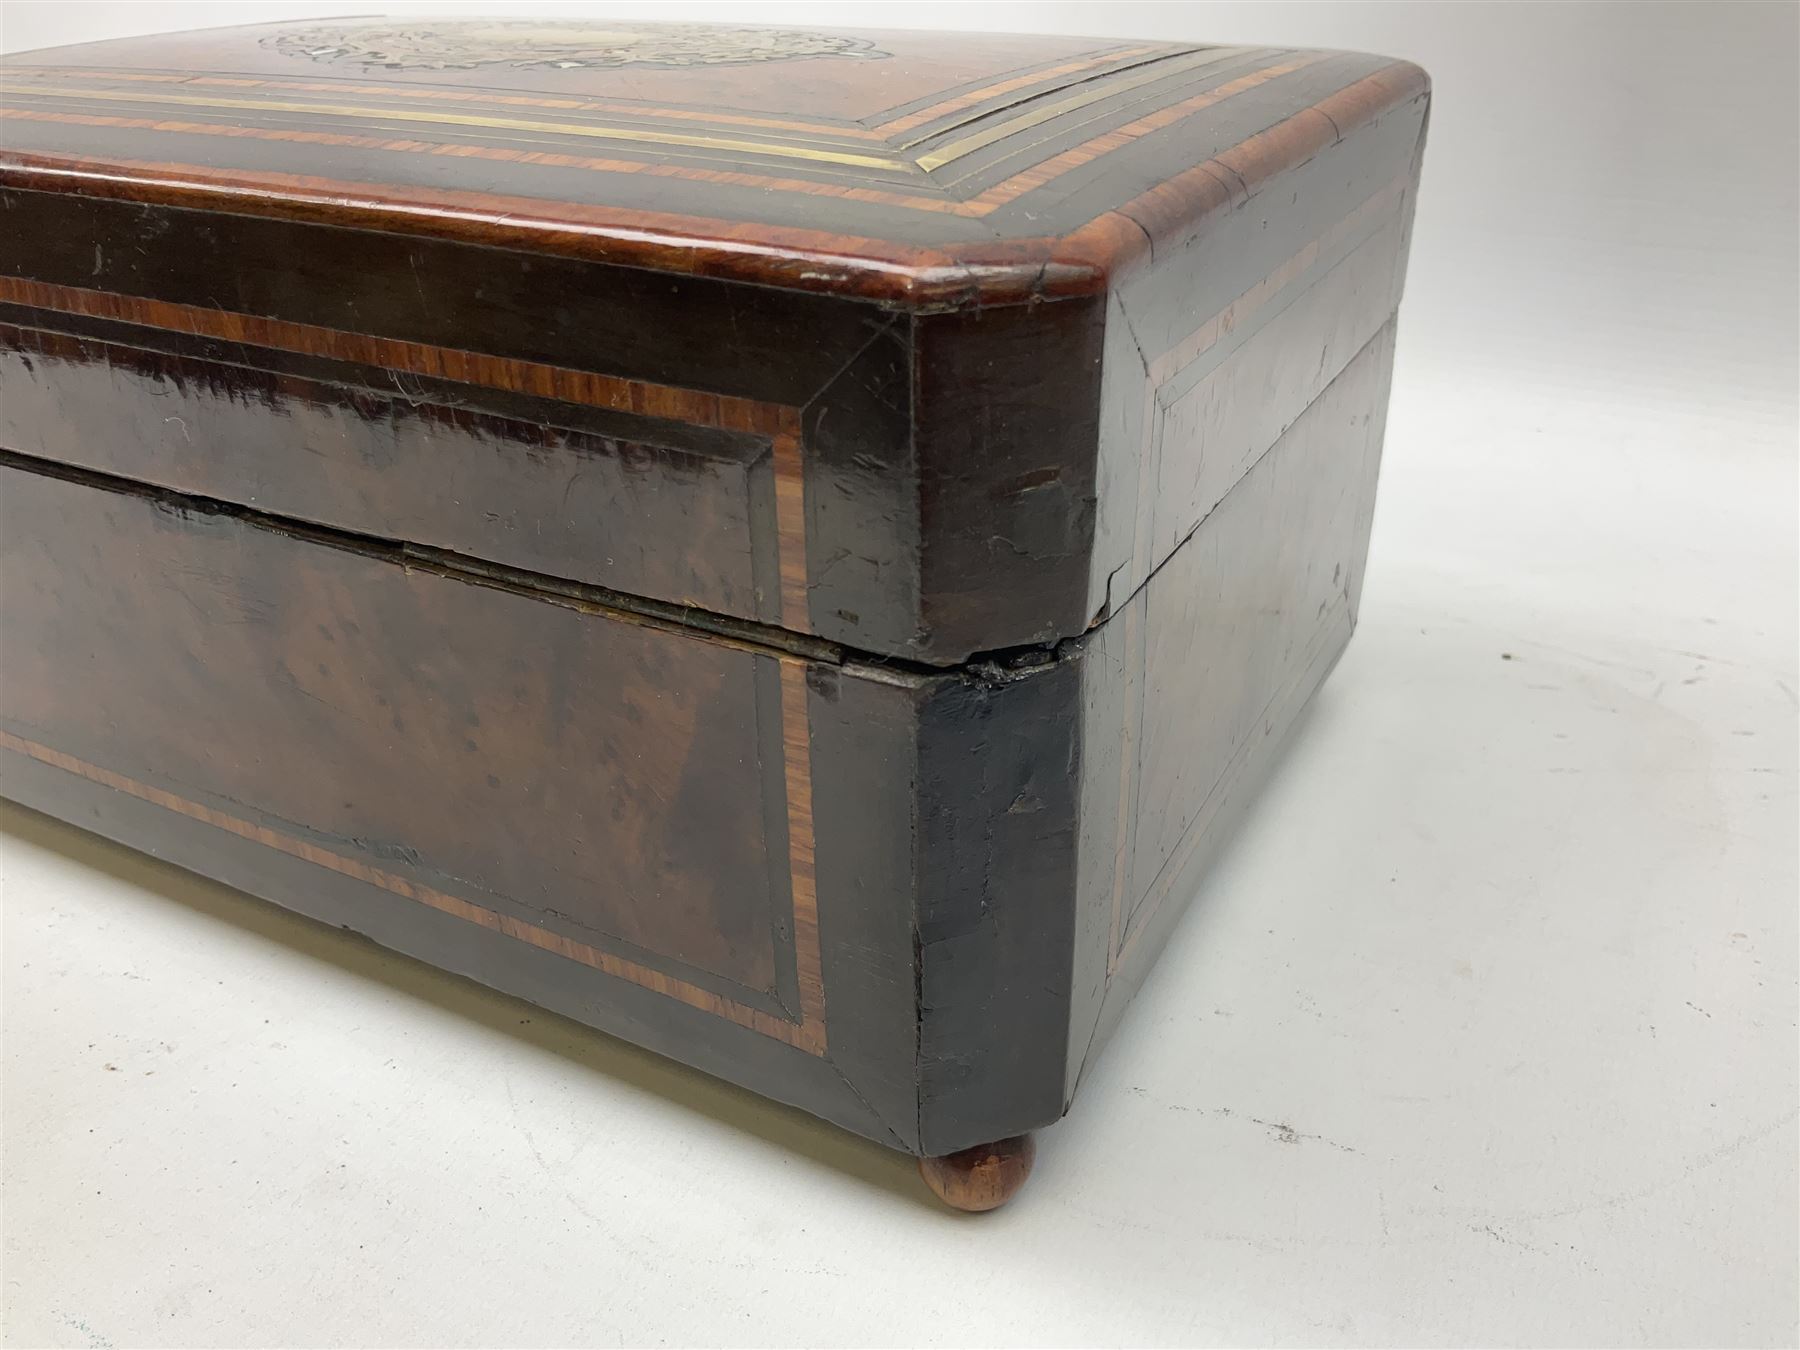 ANTIQUE EARLY 19TH CENTURY BURR YEW SEWING BOX